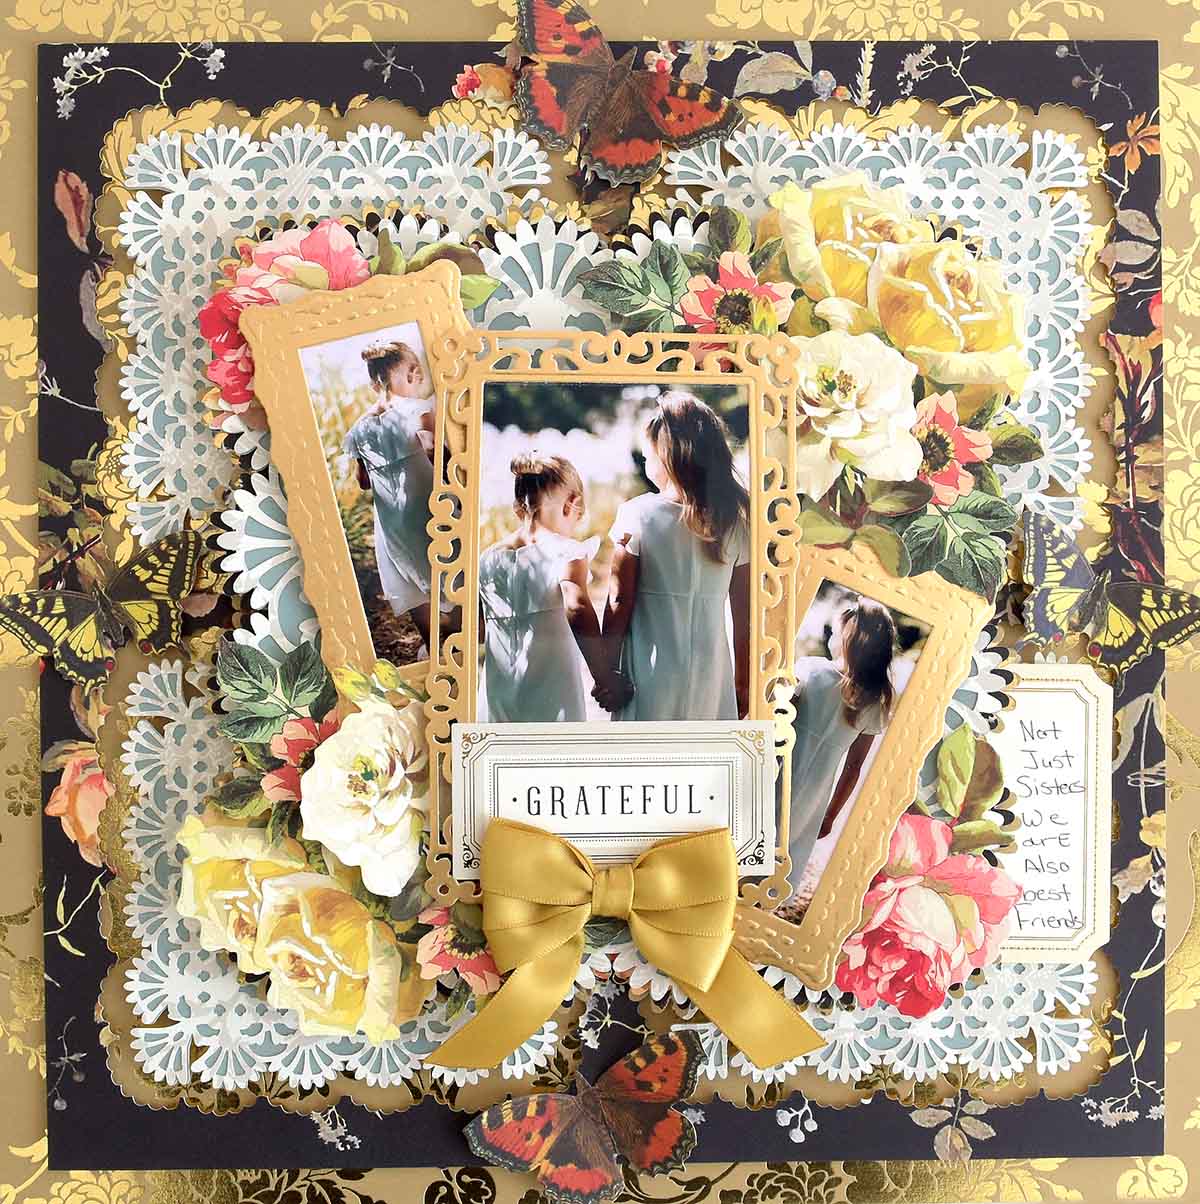 Anna Griffin - Papers and Embellishments - Heirloom